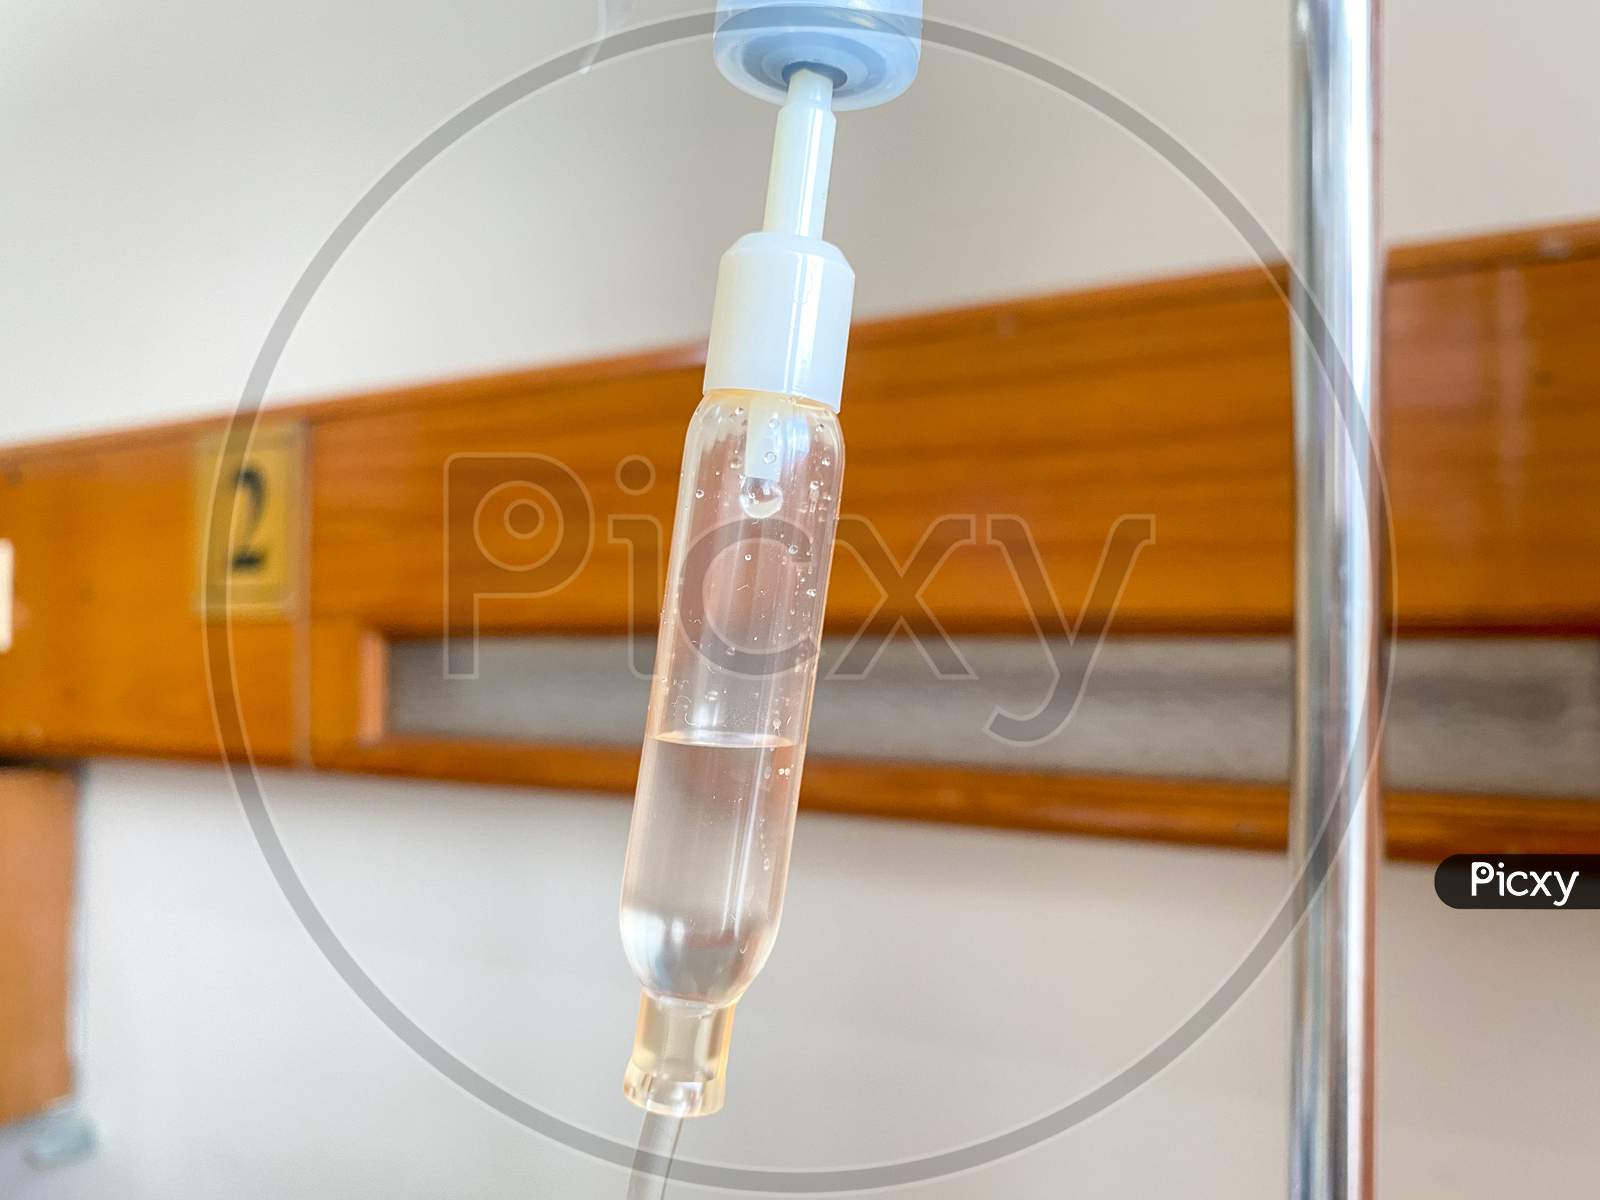 Drip Liquid Infusion Of Patient In Hospital